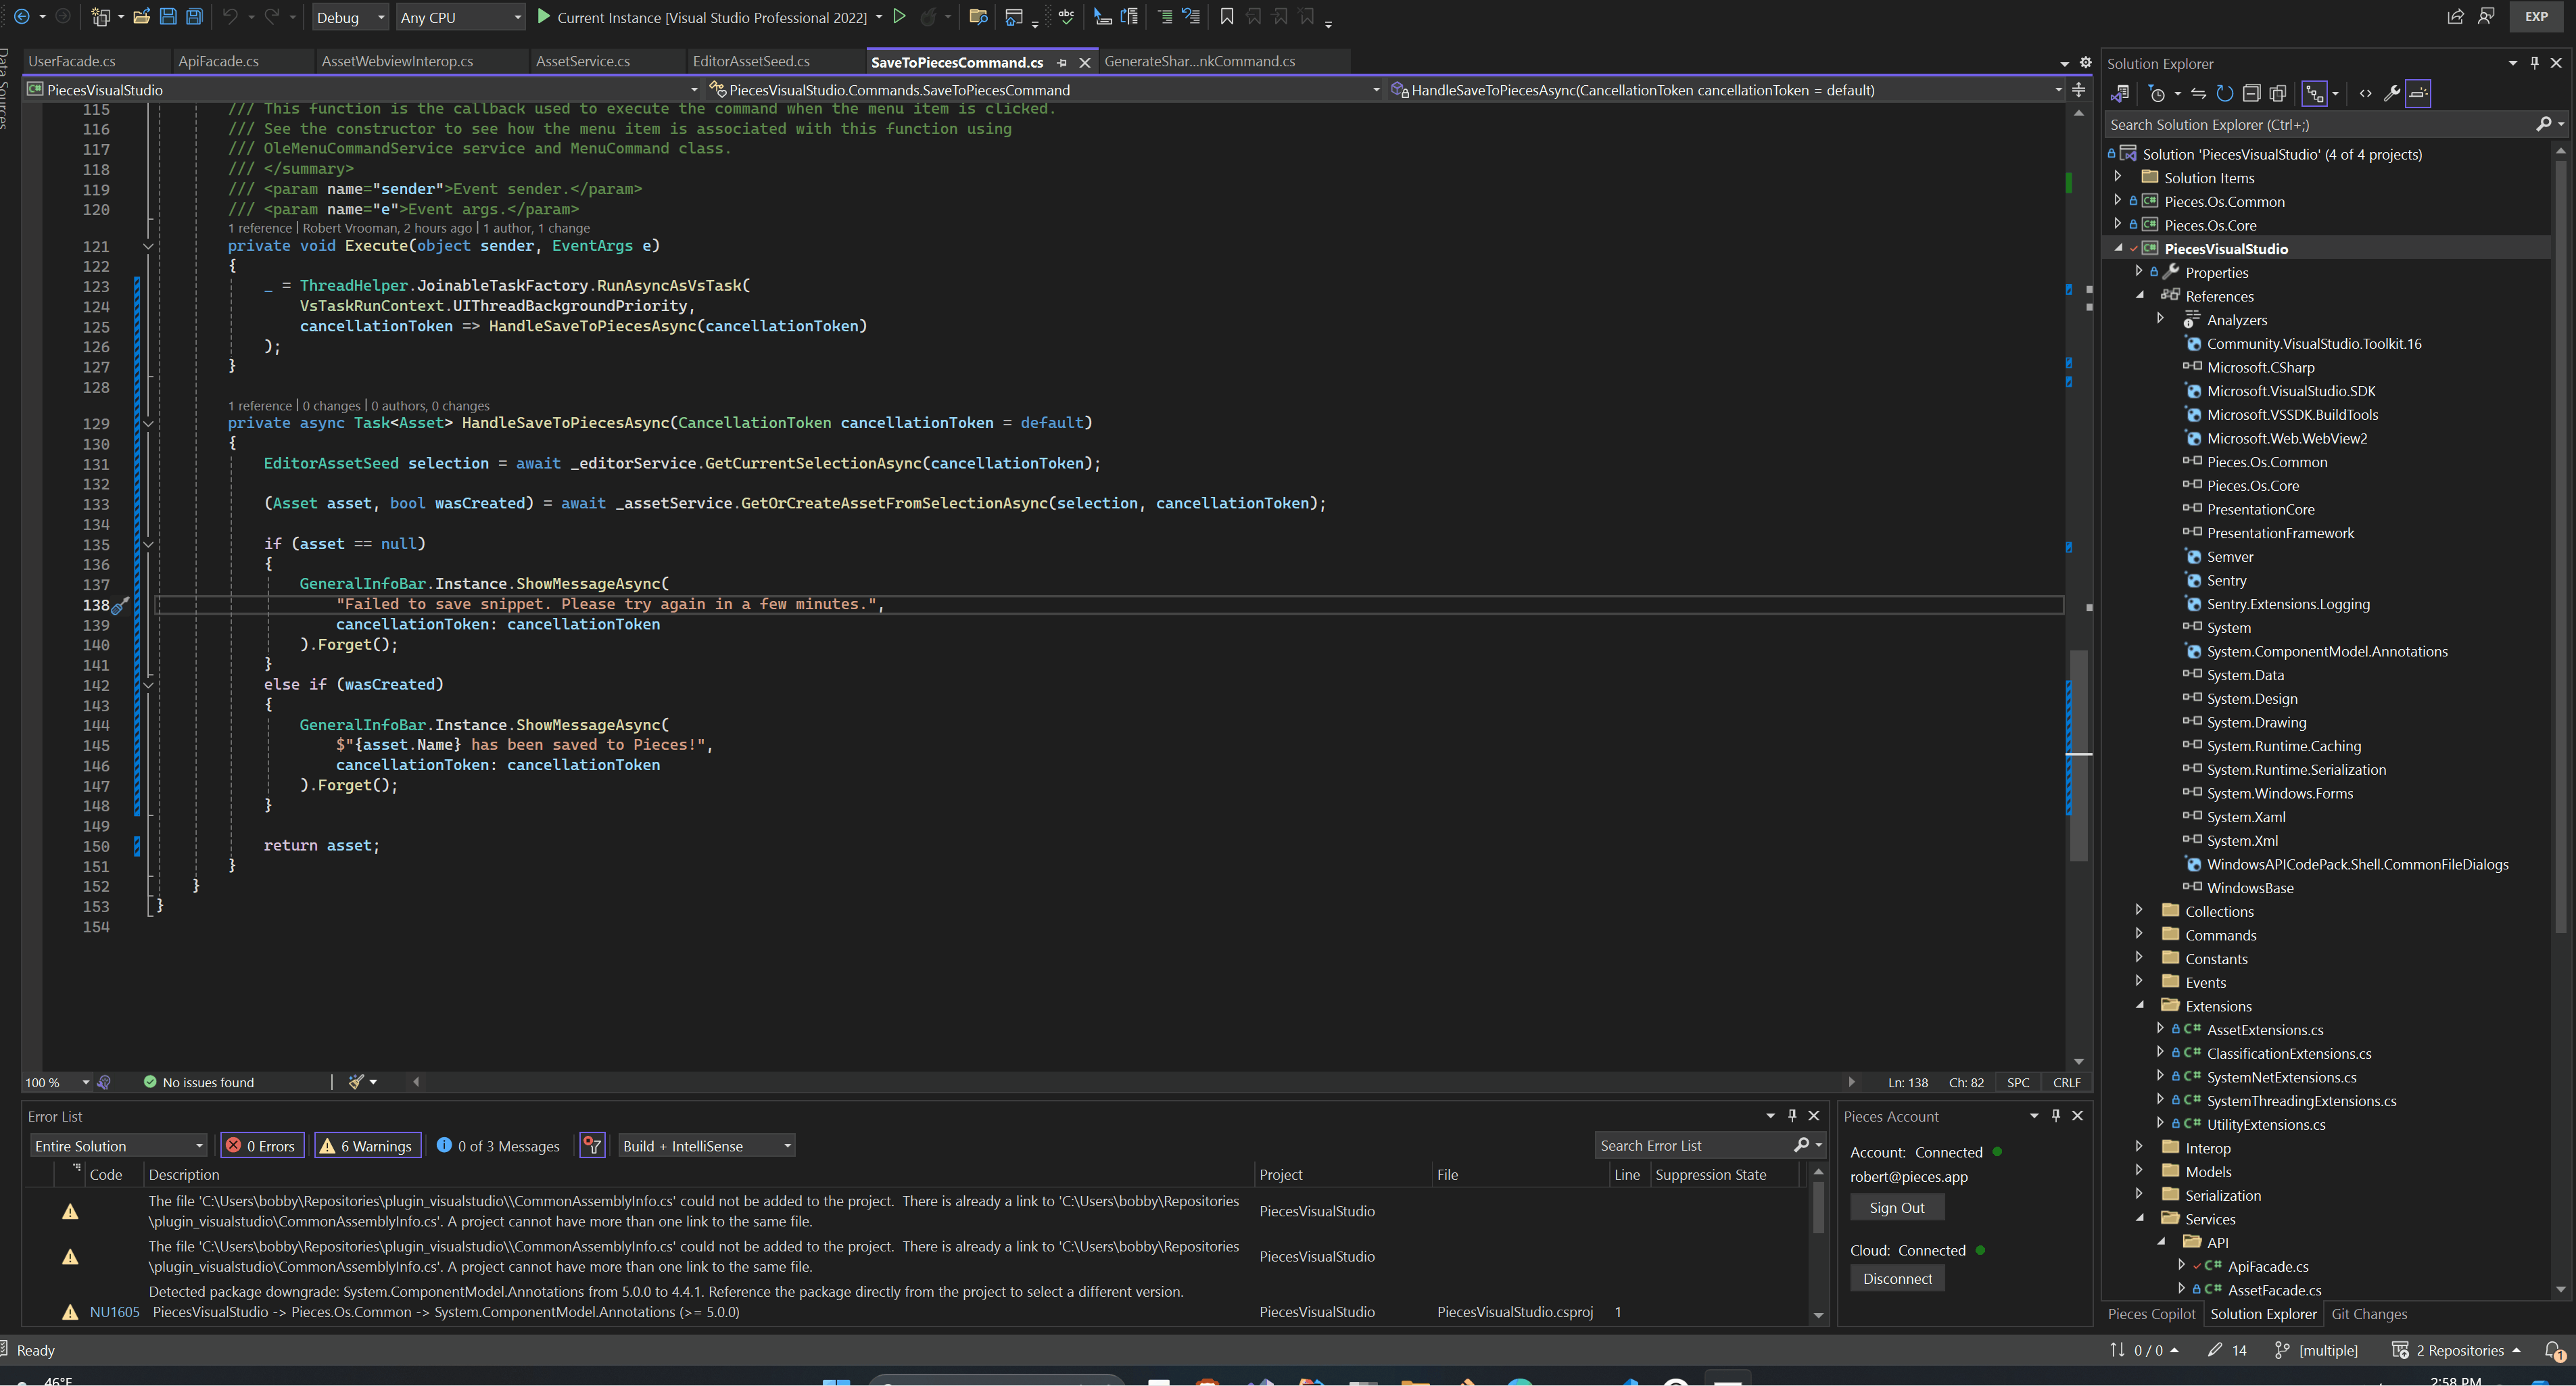 Saving code to Pieces from the Visual Studio IDE.